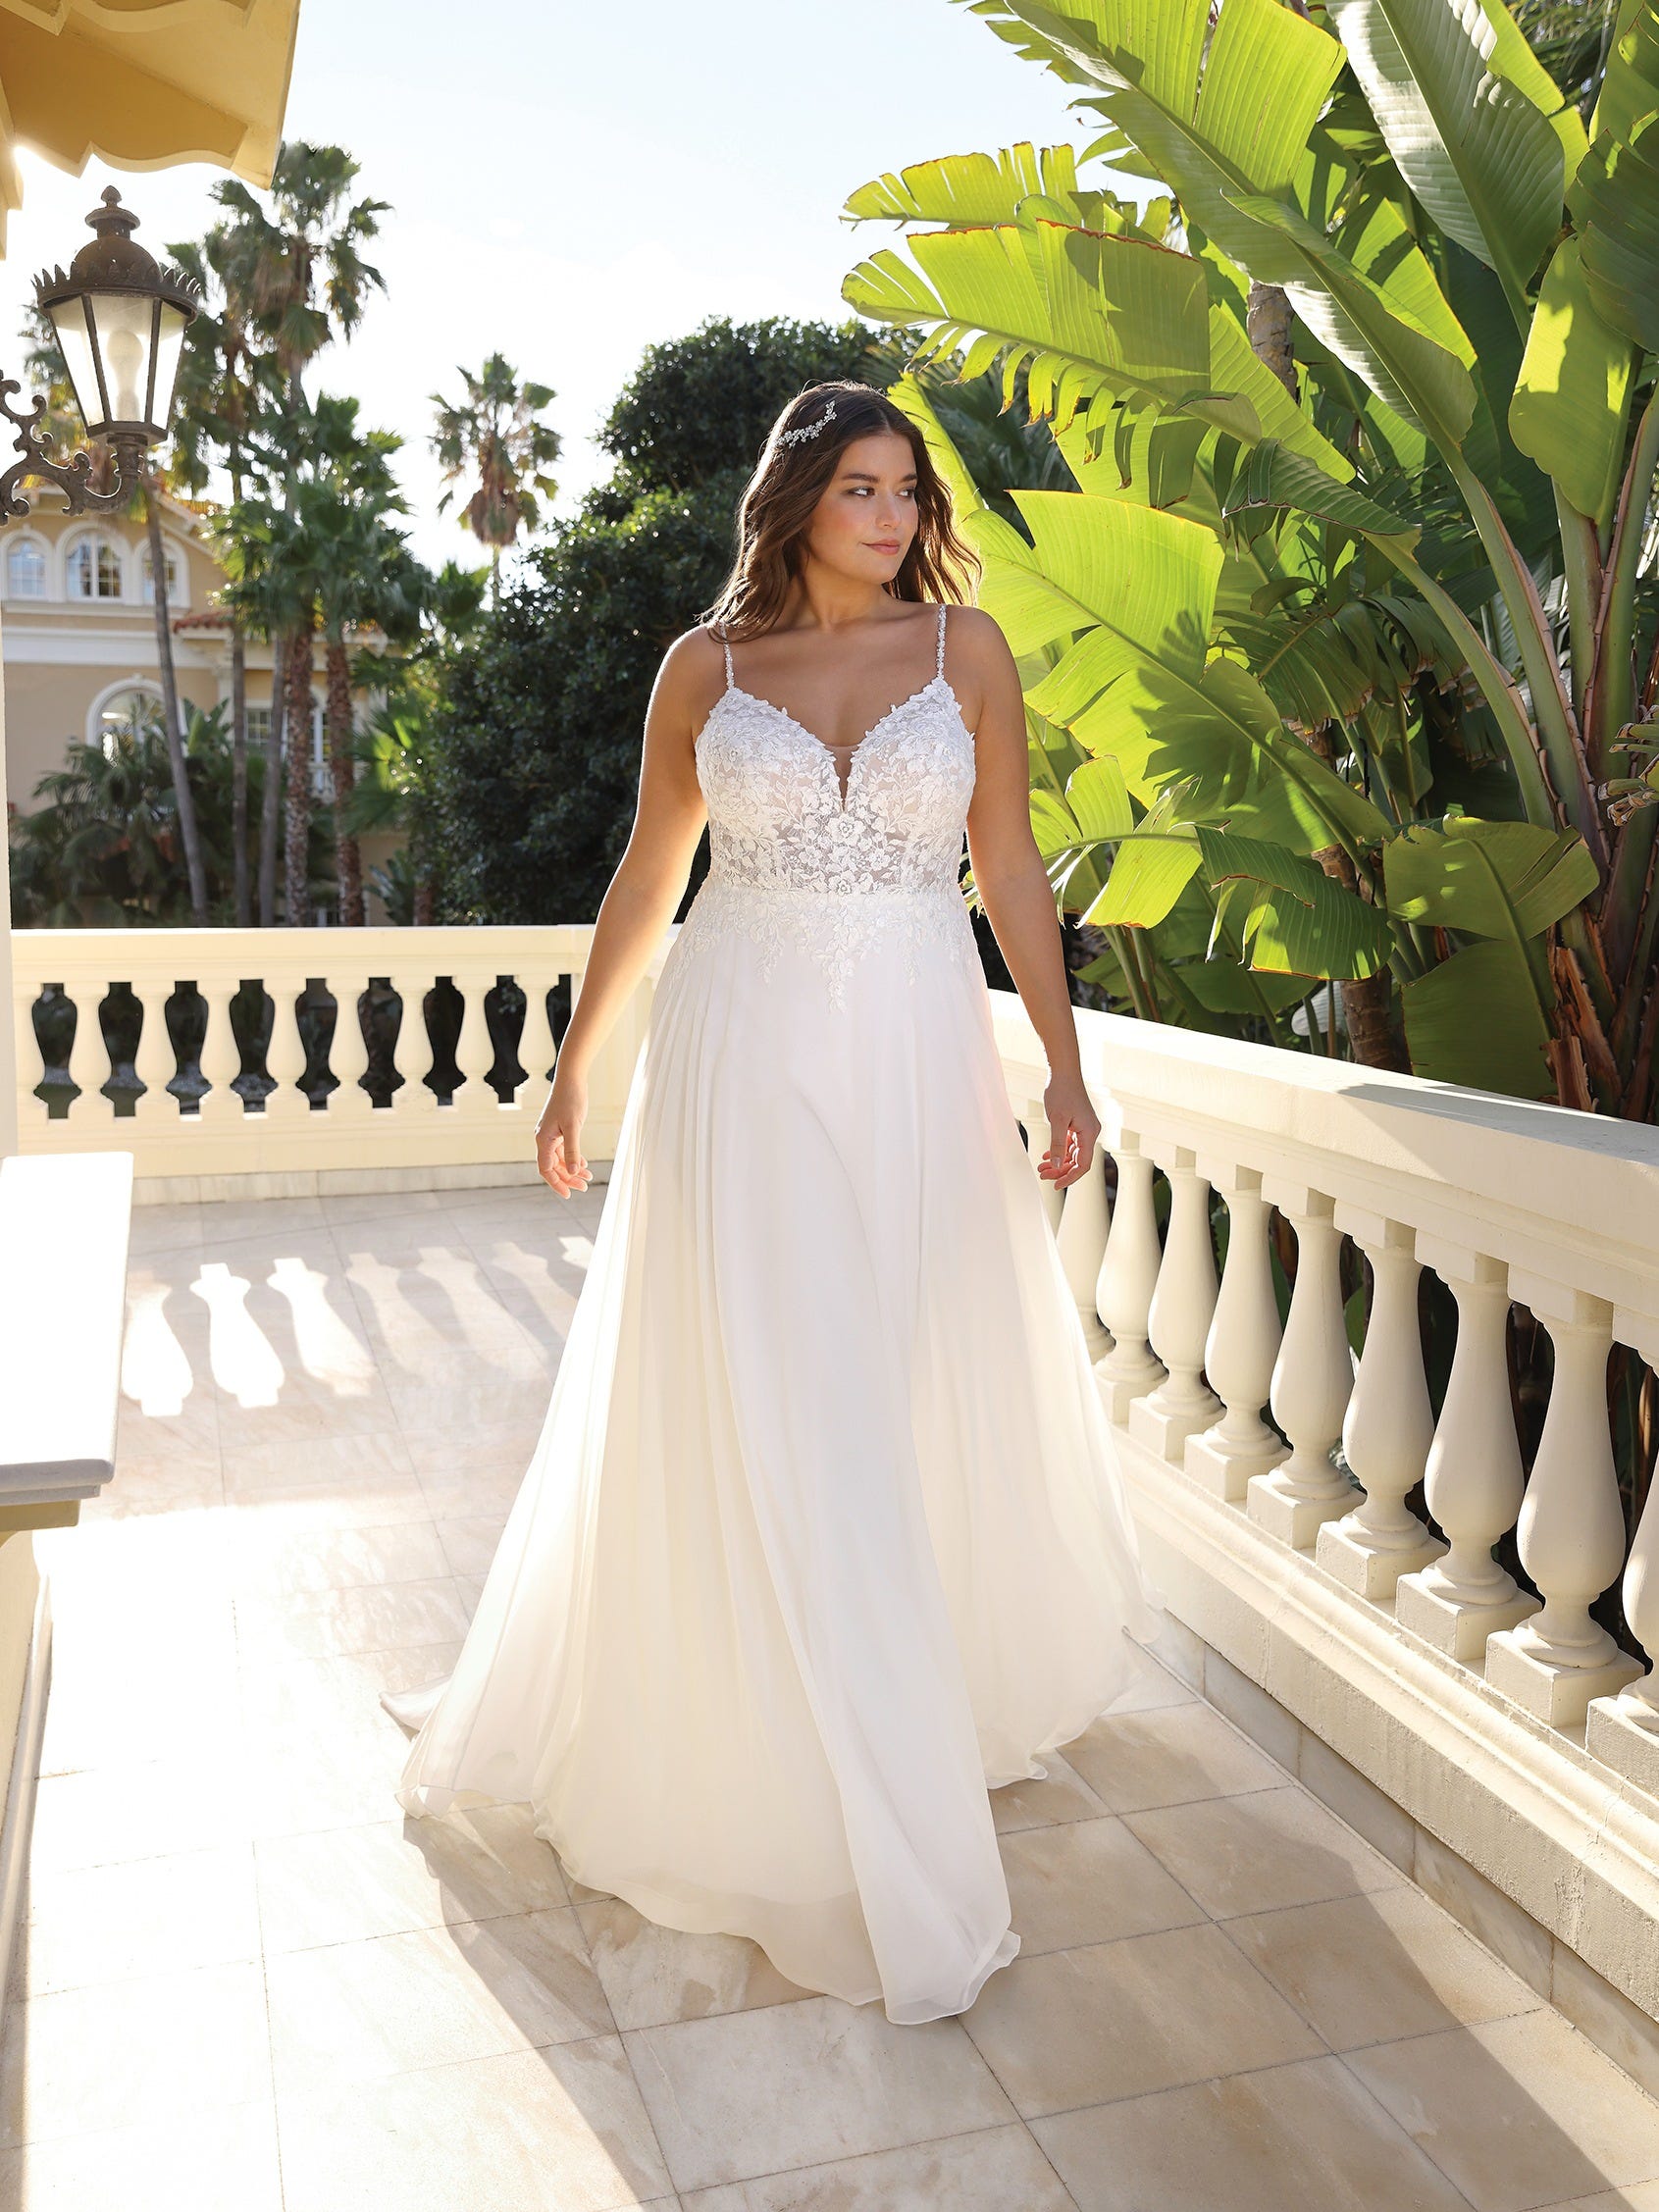 Plus Size Wedding Dresses With Sleeves: 21 Ideas For Bride | Plus size  wedding dresses with sleeves, Plus size wedding gowns, Plus wedding dresses